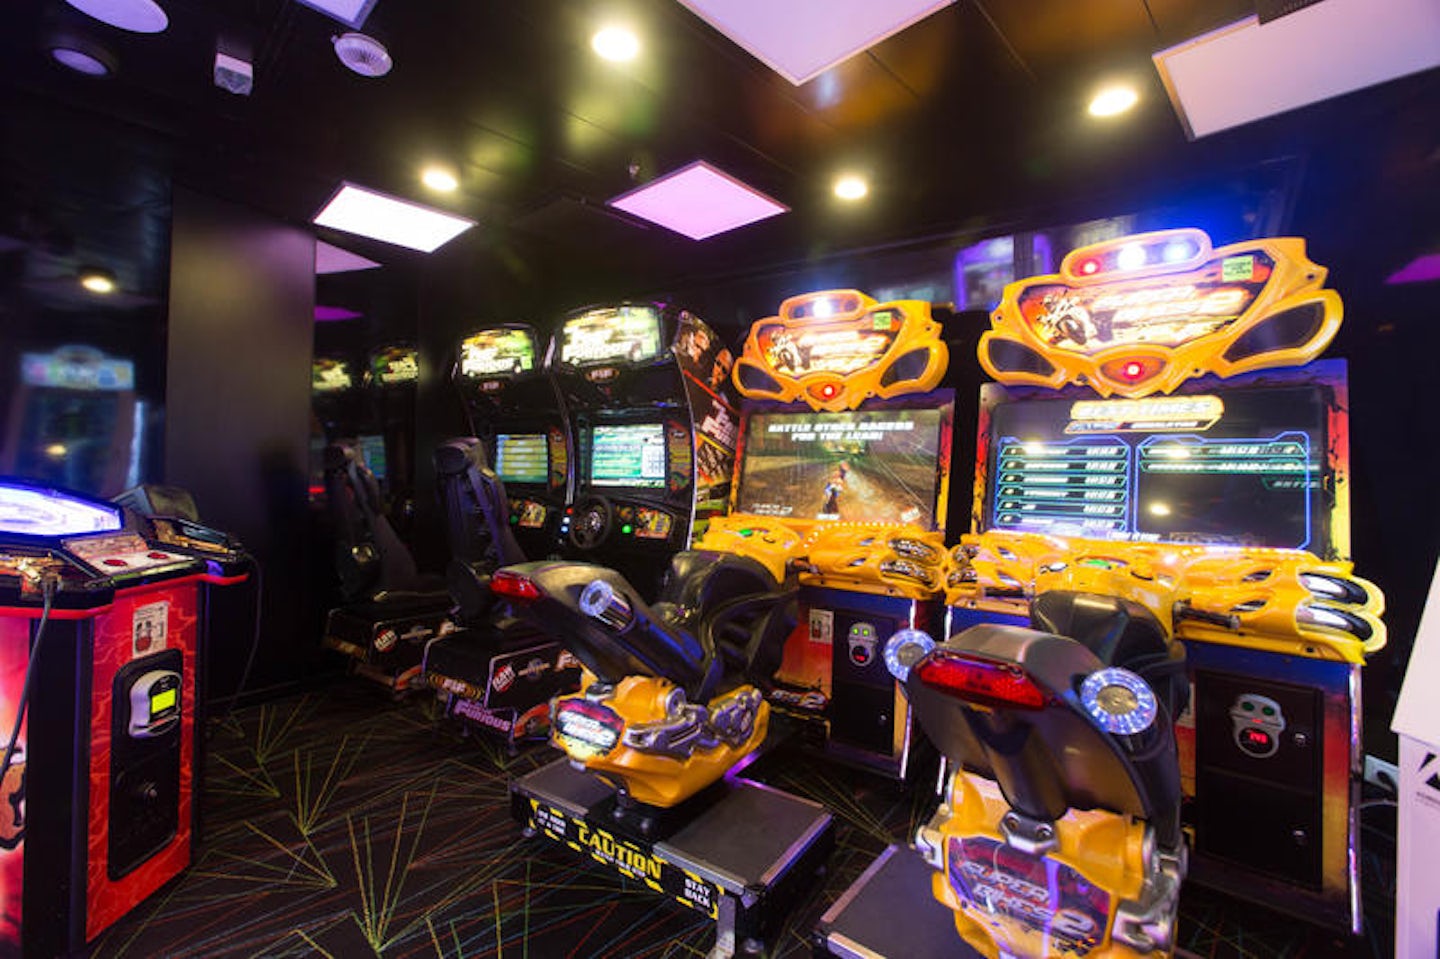 Challenger's Video Arcade on Enchantment of the Seas